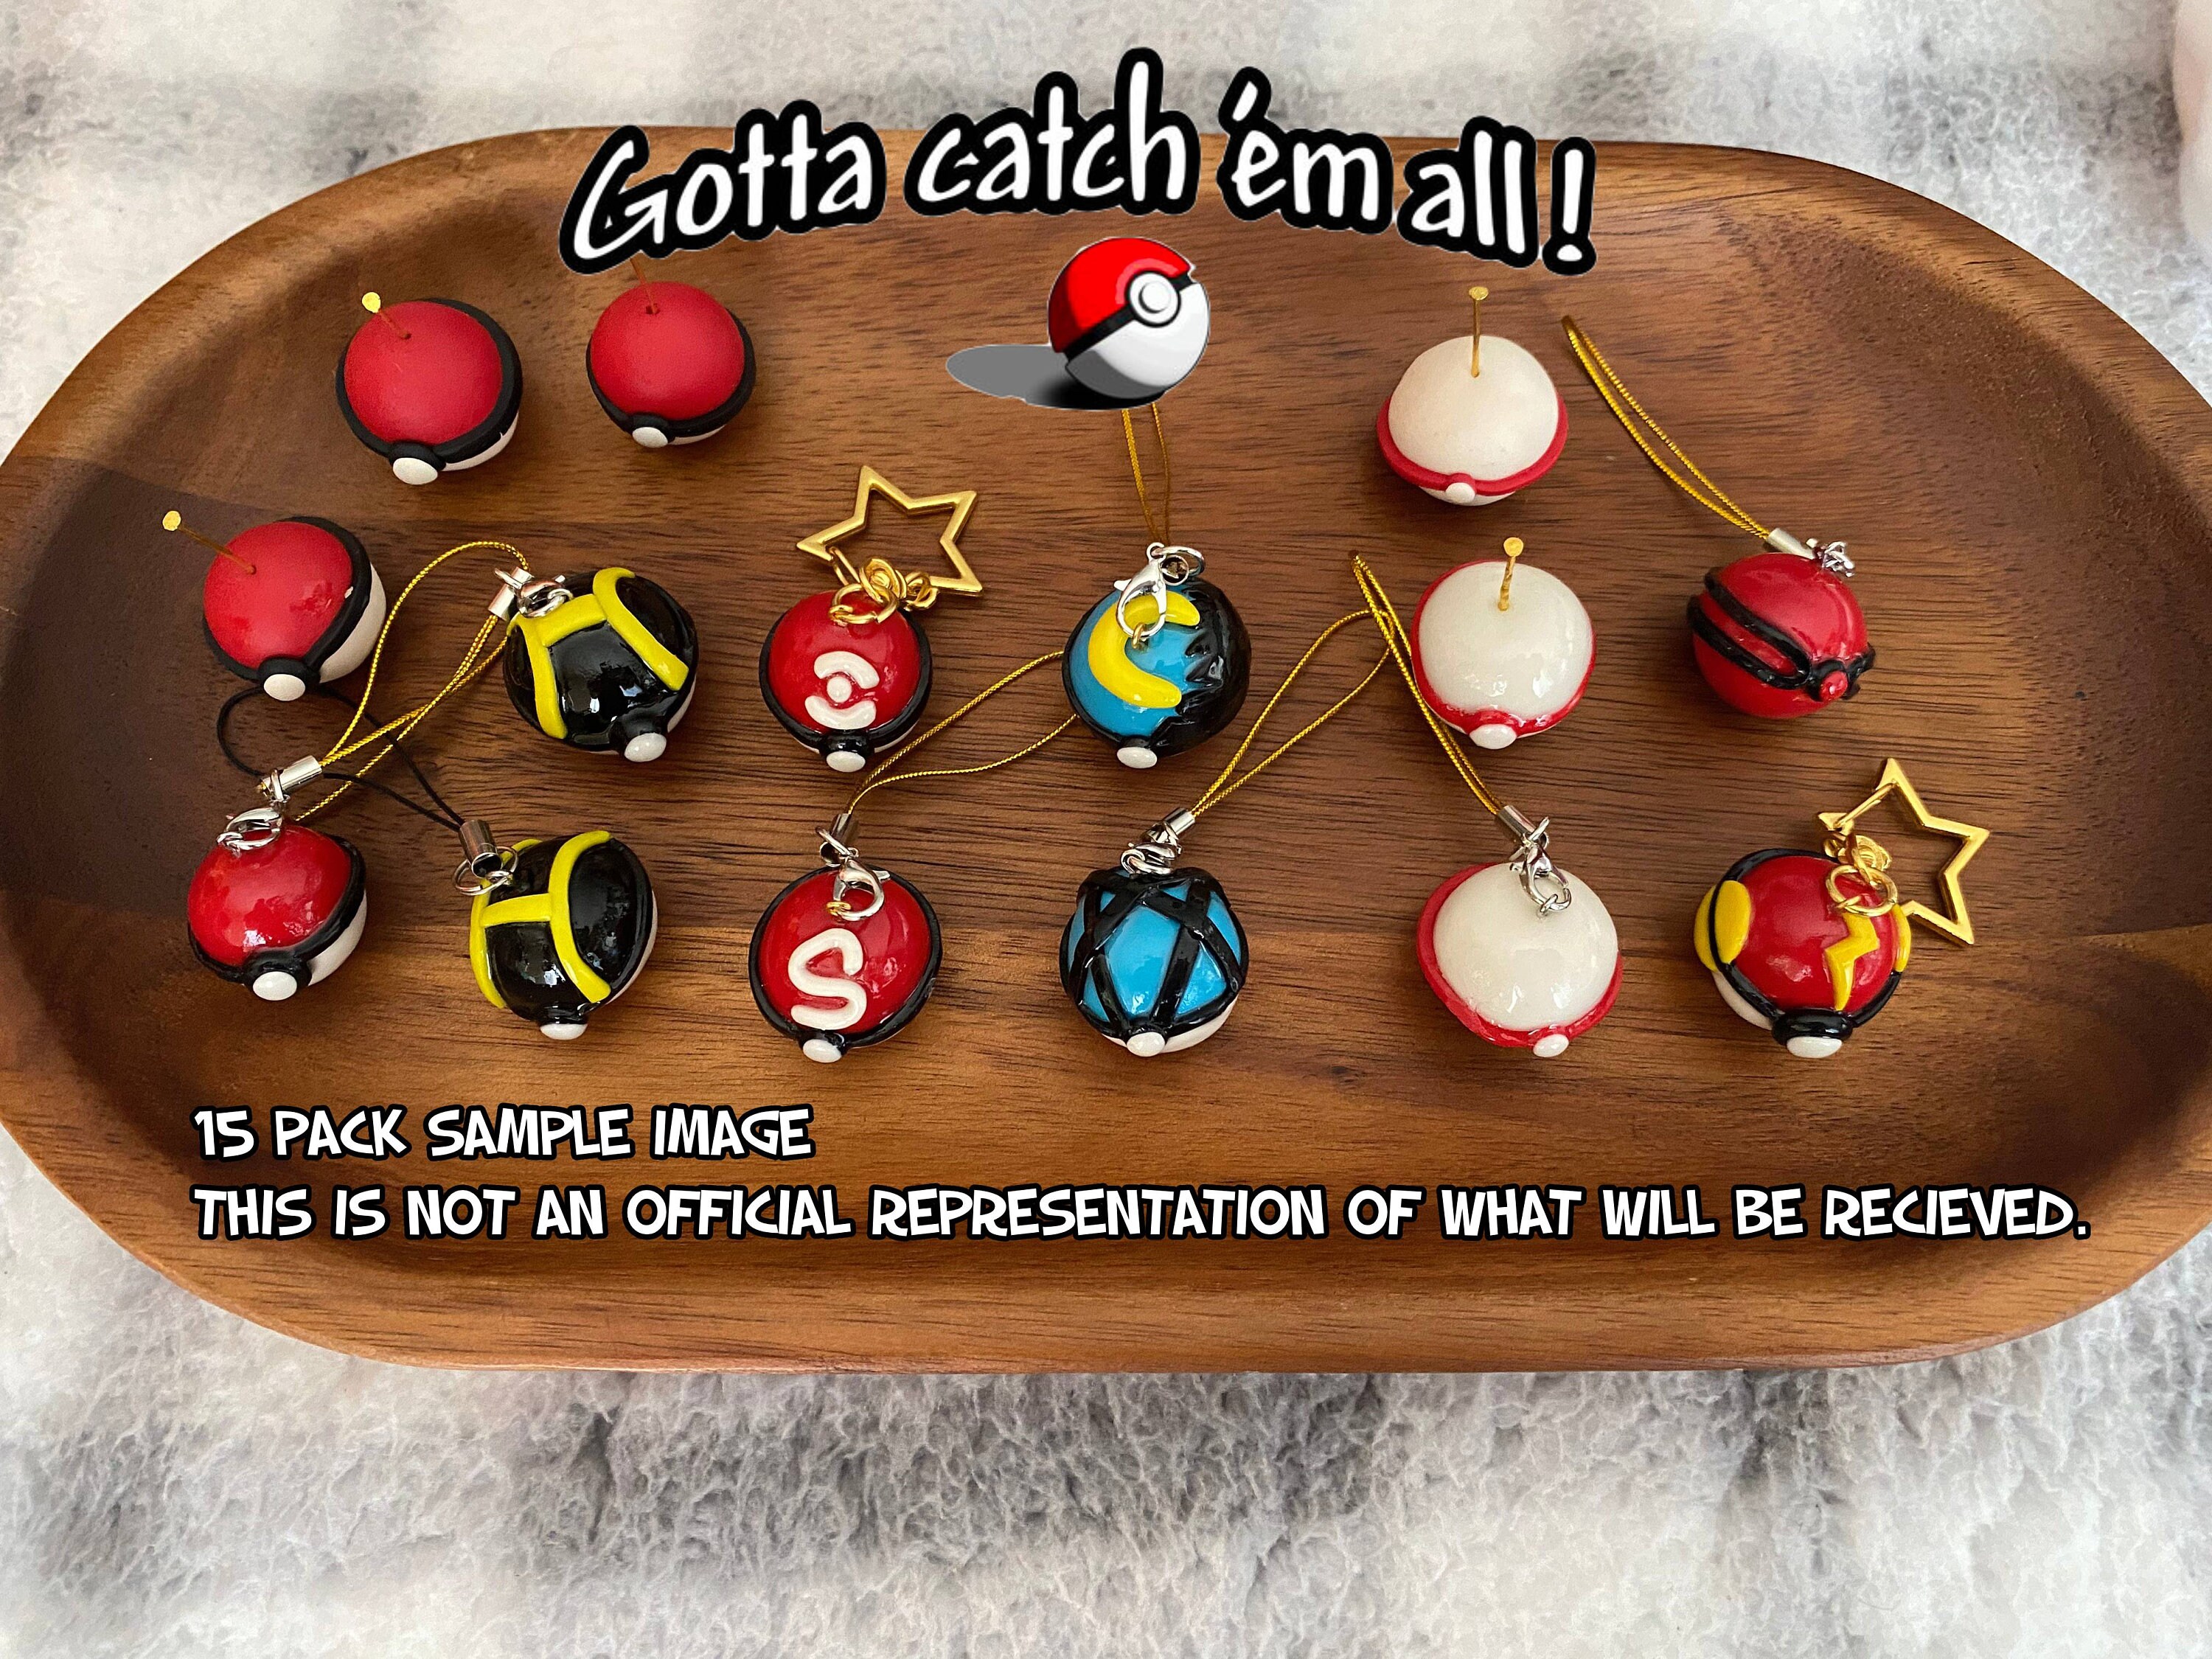 Mini Pokeballs, Clay Sprinkles, Fimo Slices, Embellishments, Nail Deco, Resin  Fillers, for Resin, Craft Miniatures, Dollhouse 